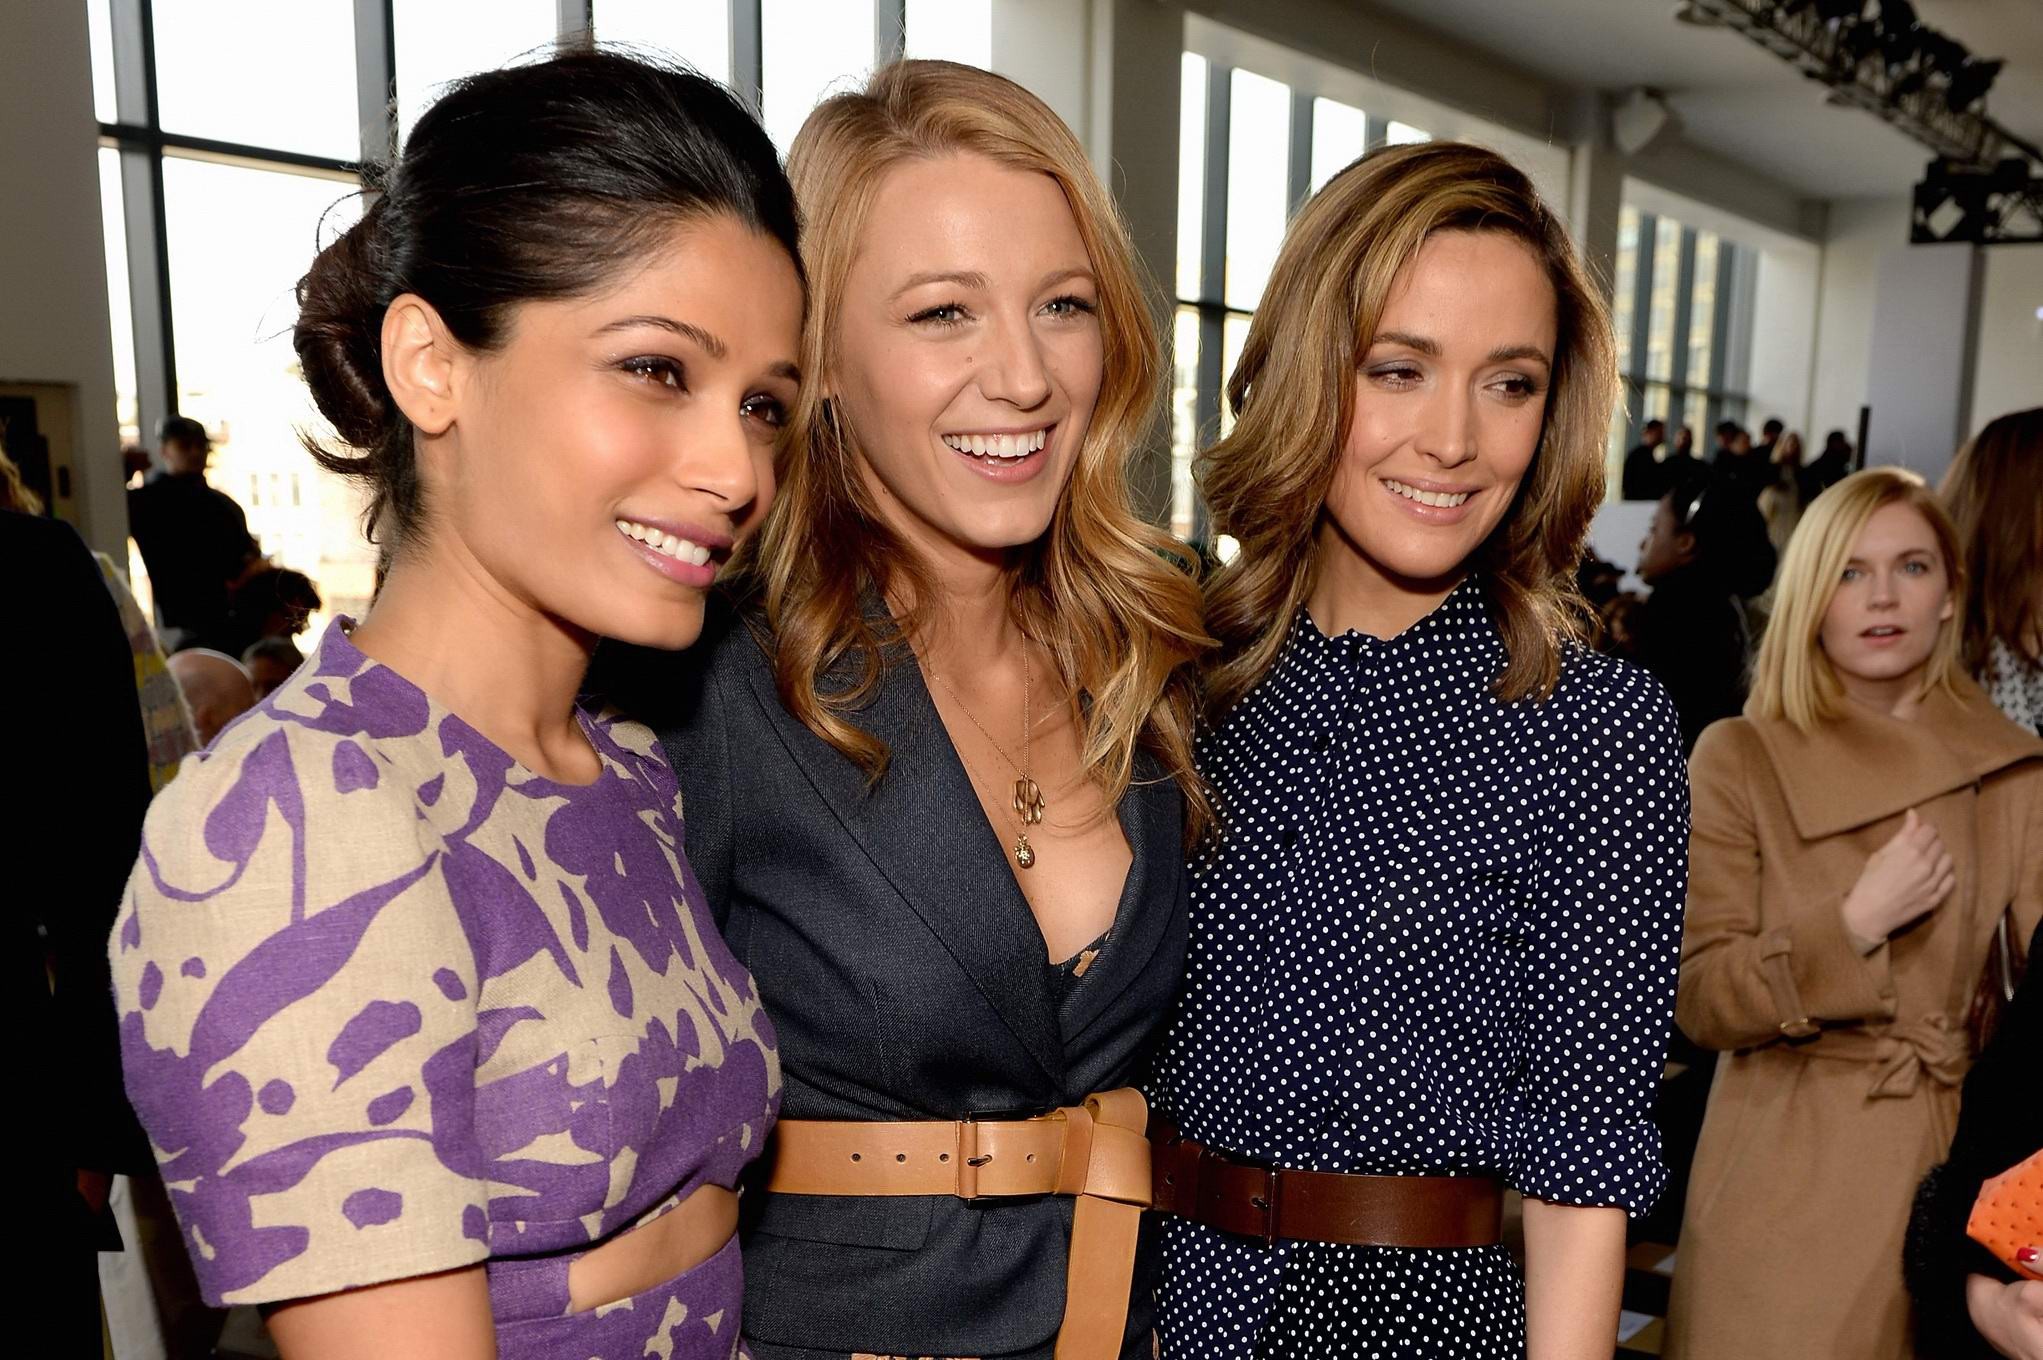 Blake Lively showing cleavage at the Michael Kors fashion show in NYC #75204735